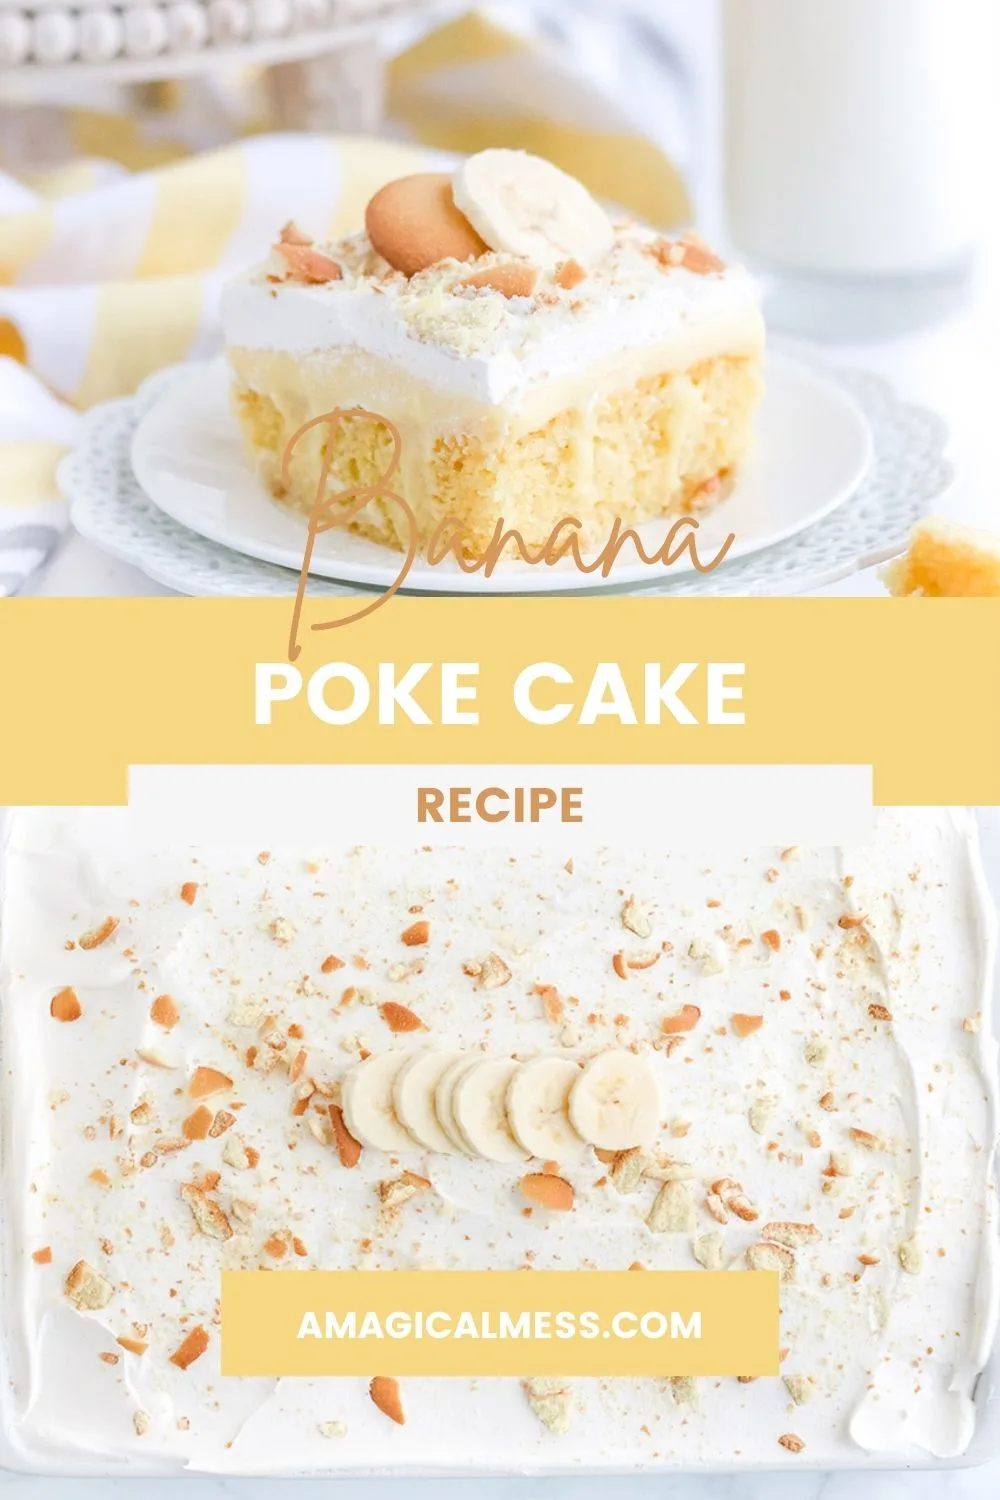 Yellow cake with white frosting topped with bananas and cookie crumbles.